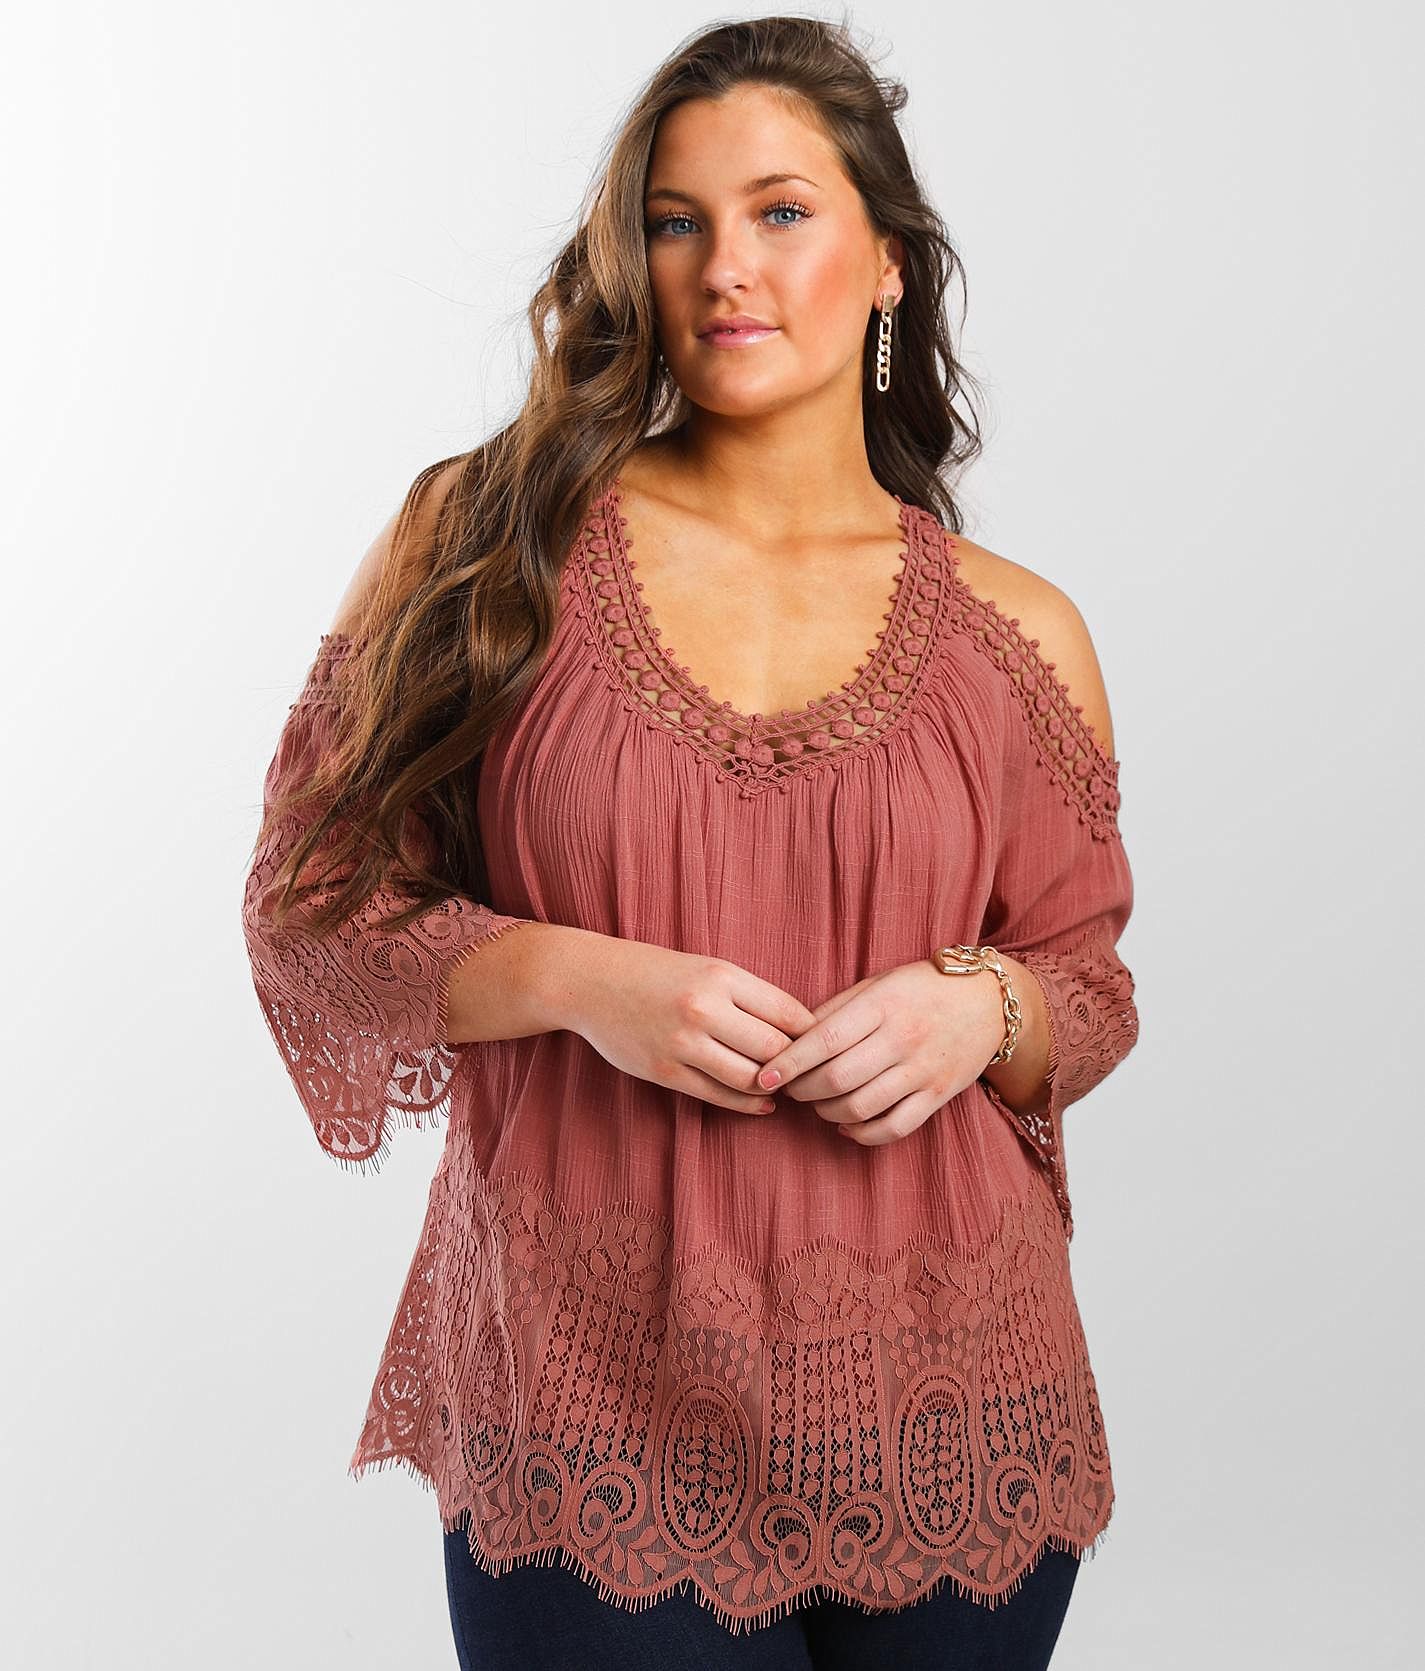 Buckle Black Cold Shoulder Top - Women's Shirts/Blouses in Canyon Rose